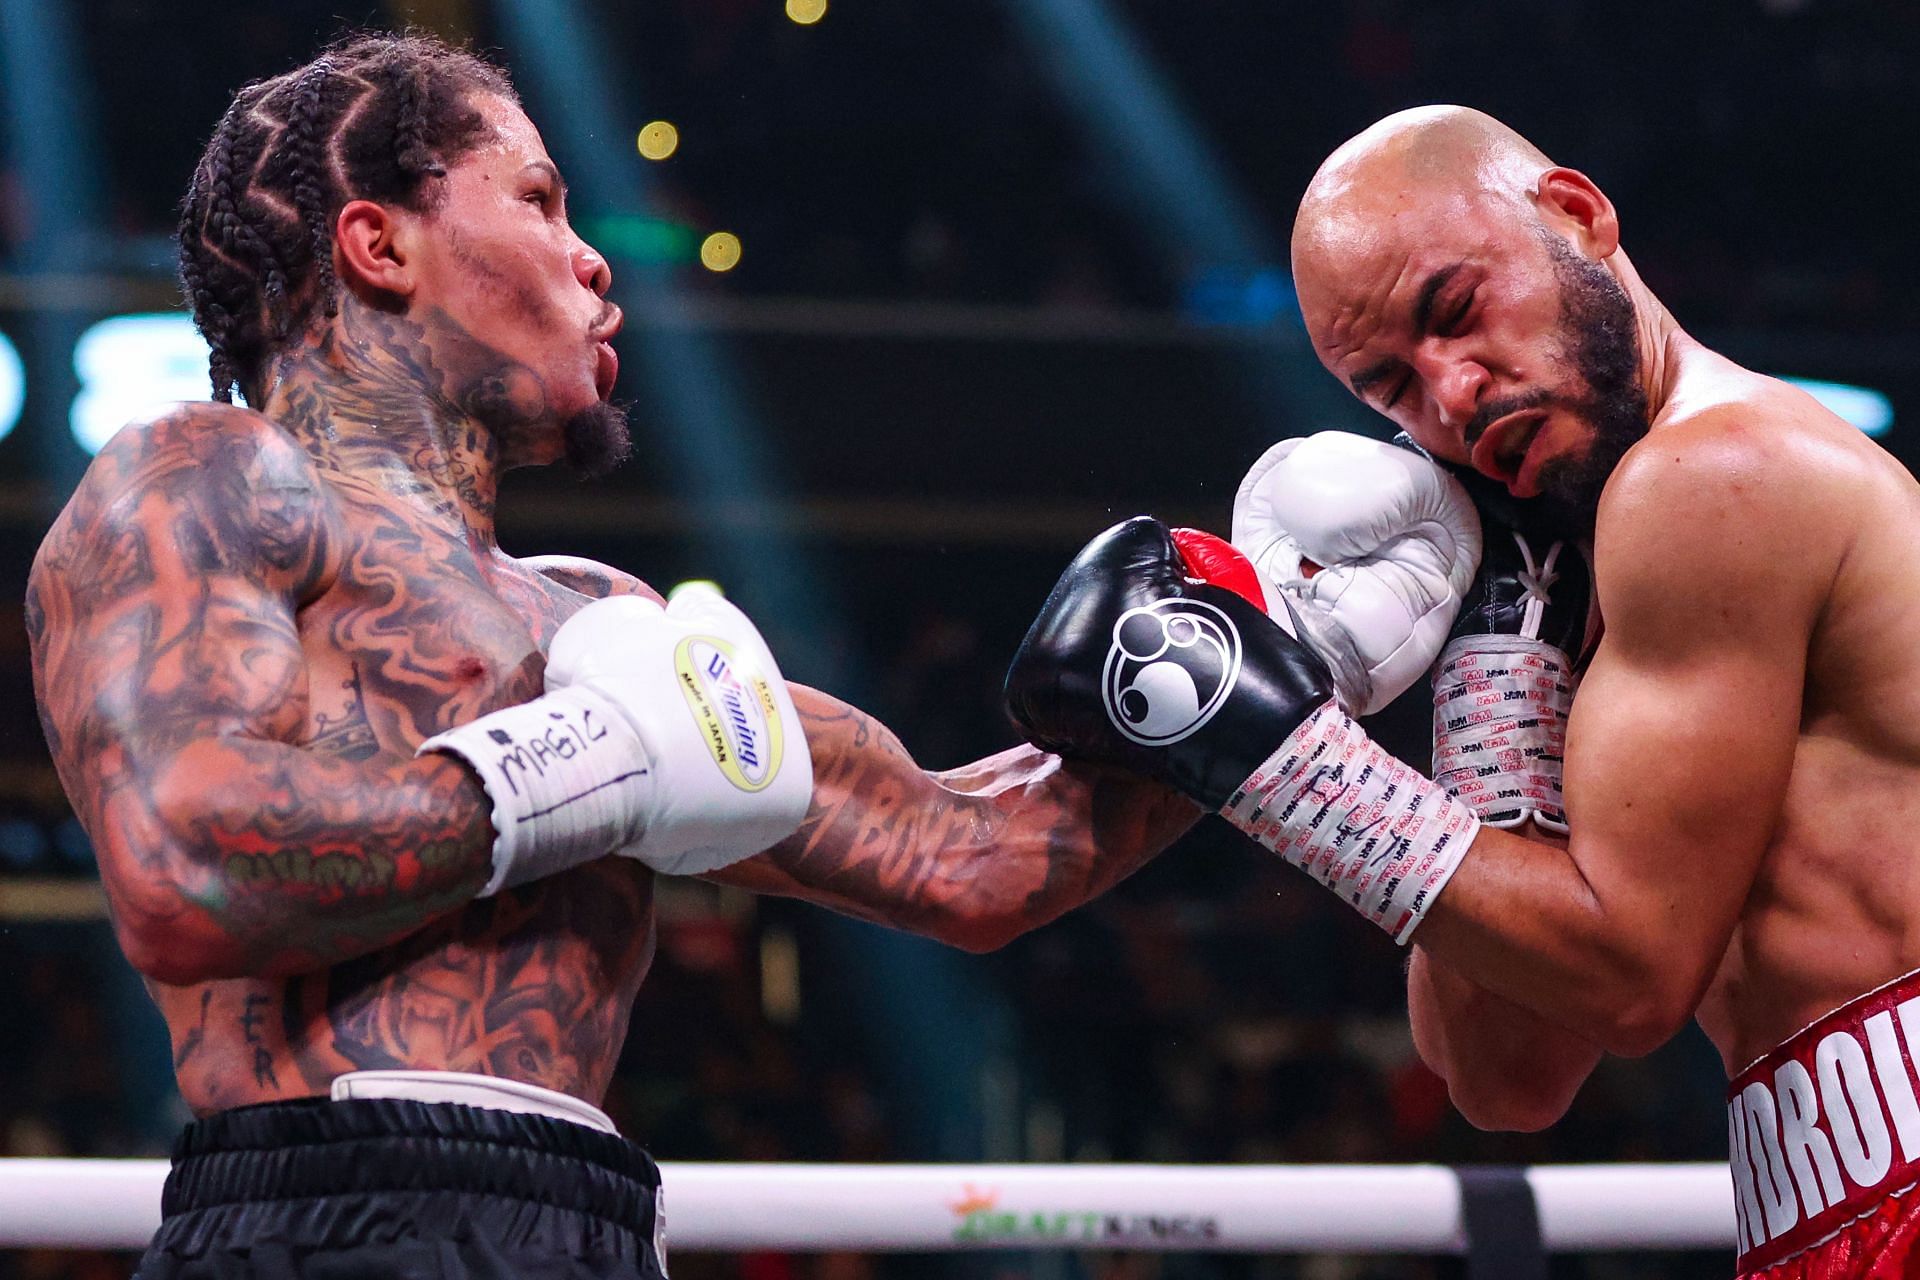 Gervonta Davis remains undefeated with 9th round win over Hector Luis Garcia